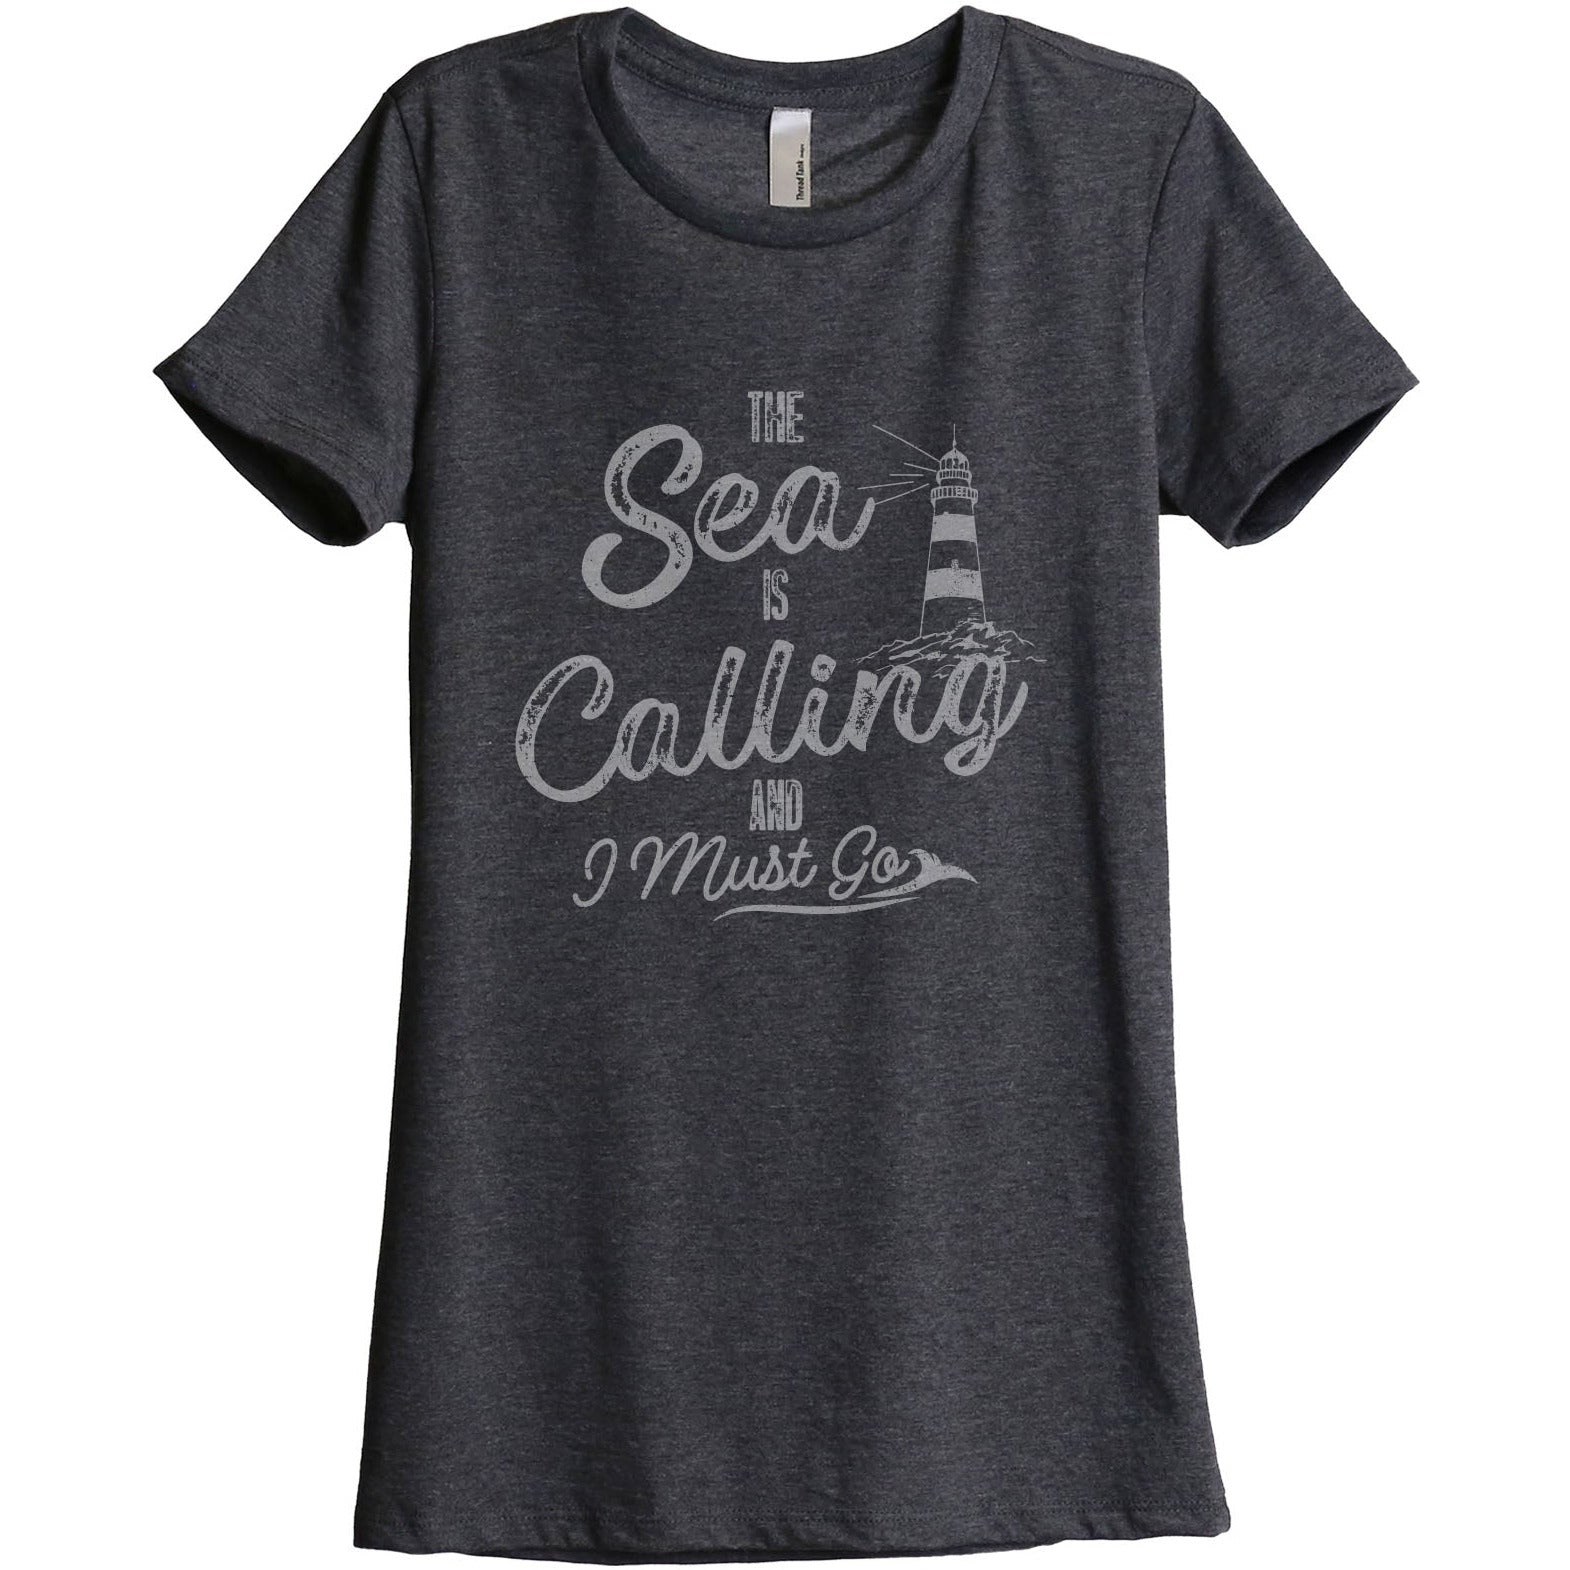 The Sea Is Calling And I Must Go - Stories You Can Wear